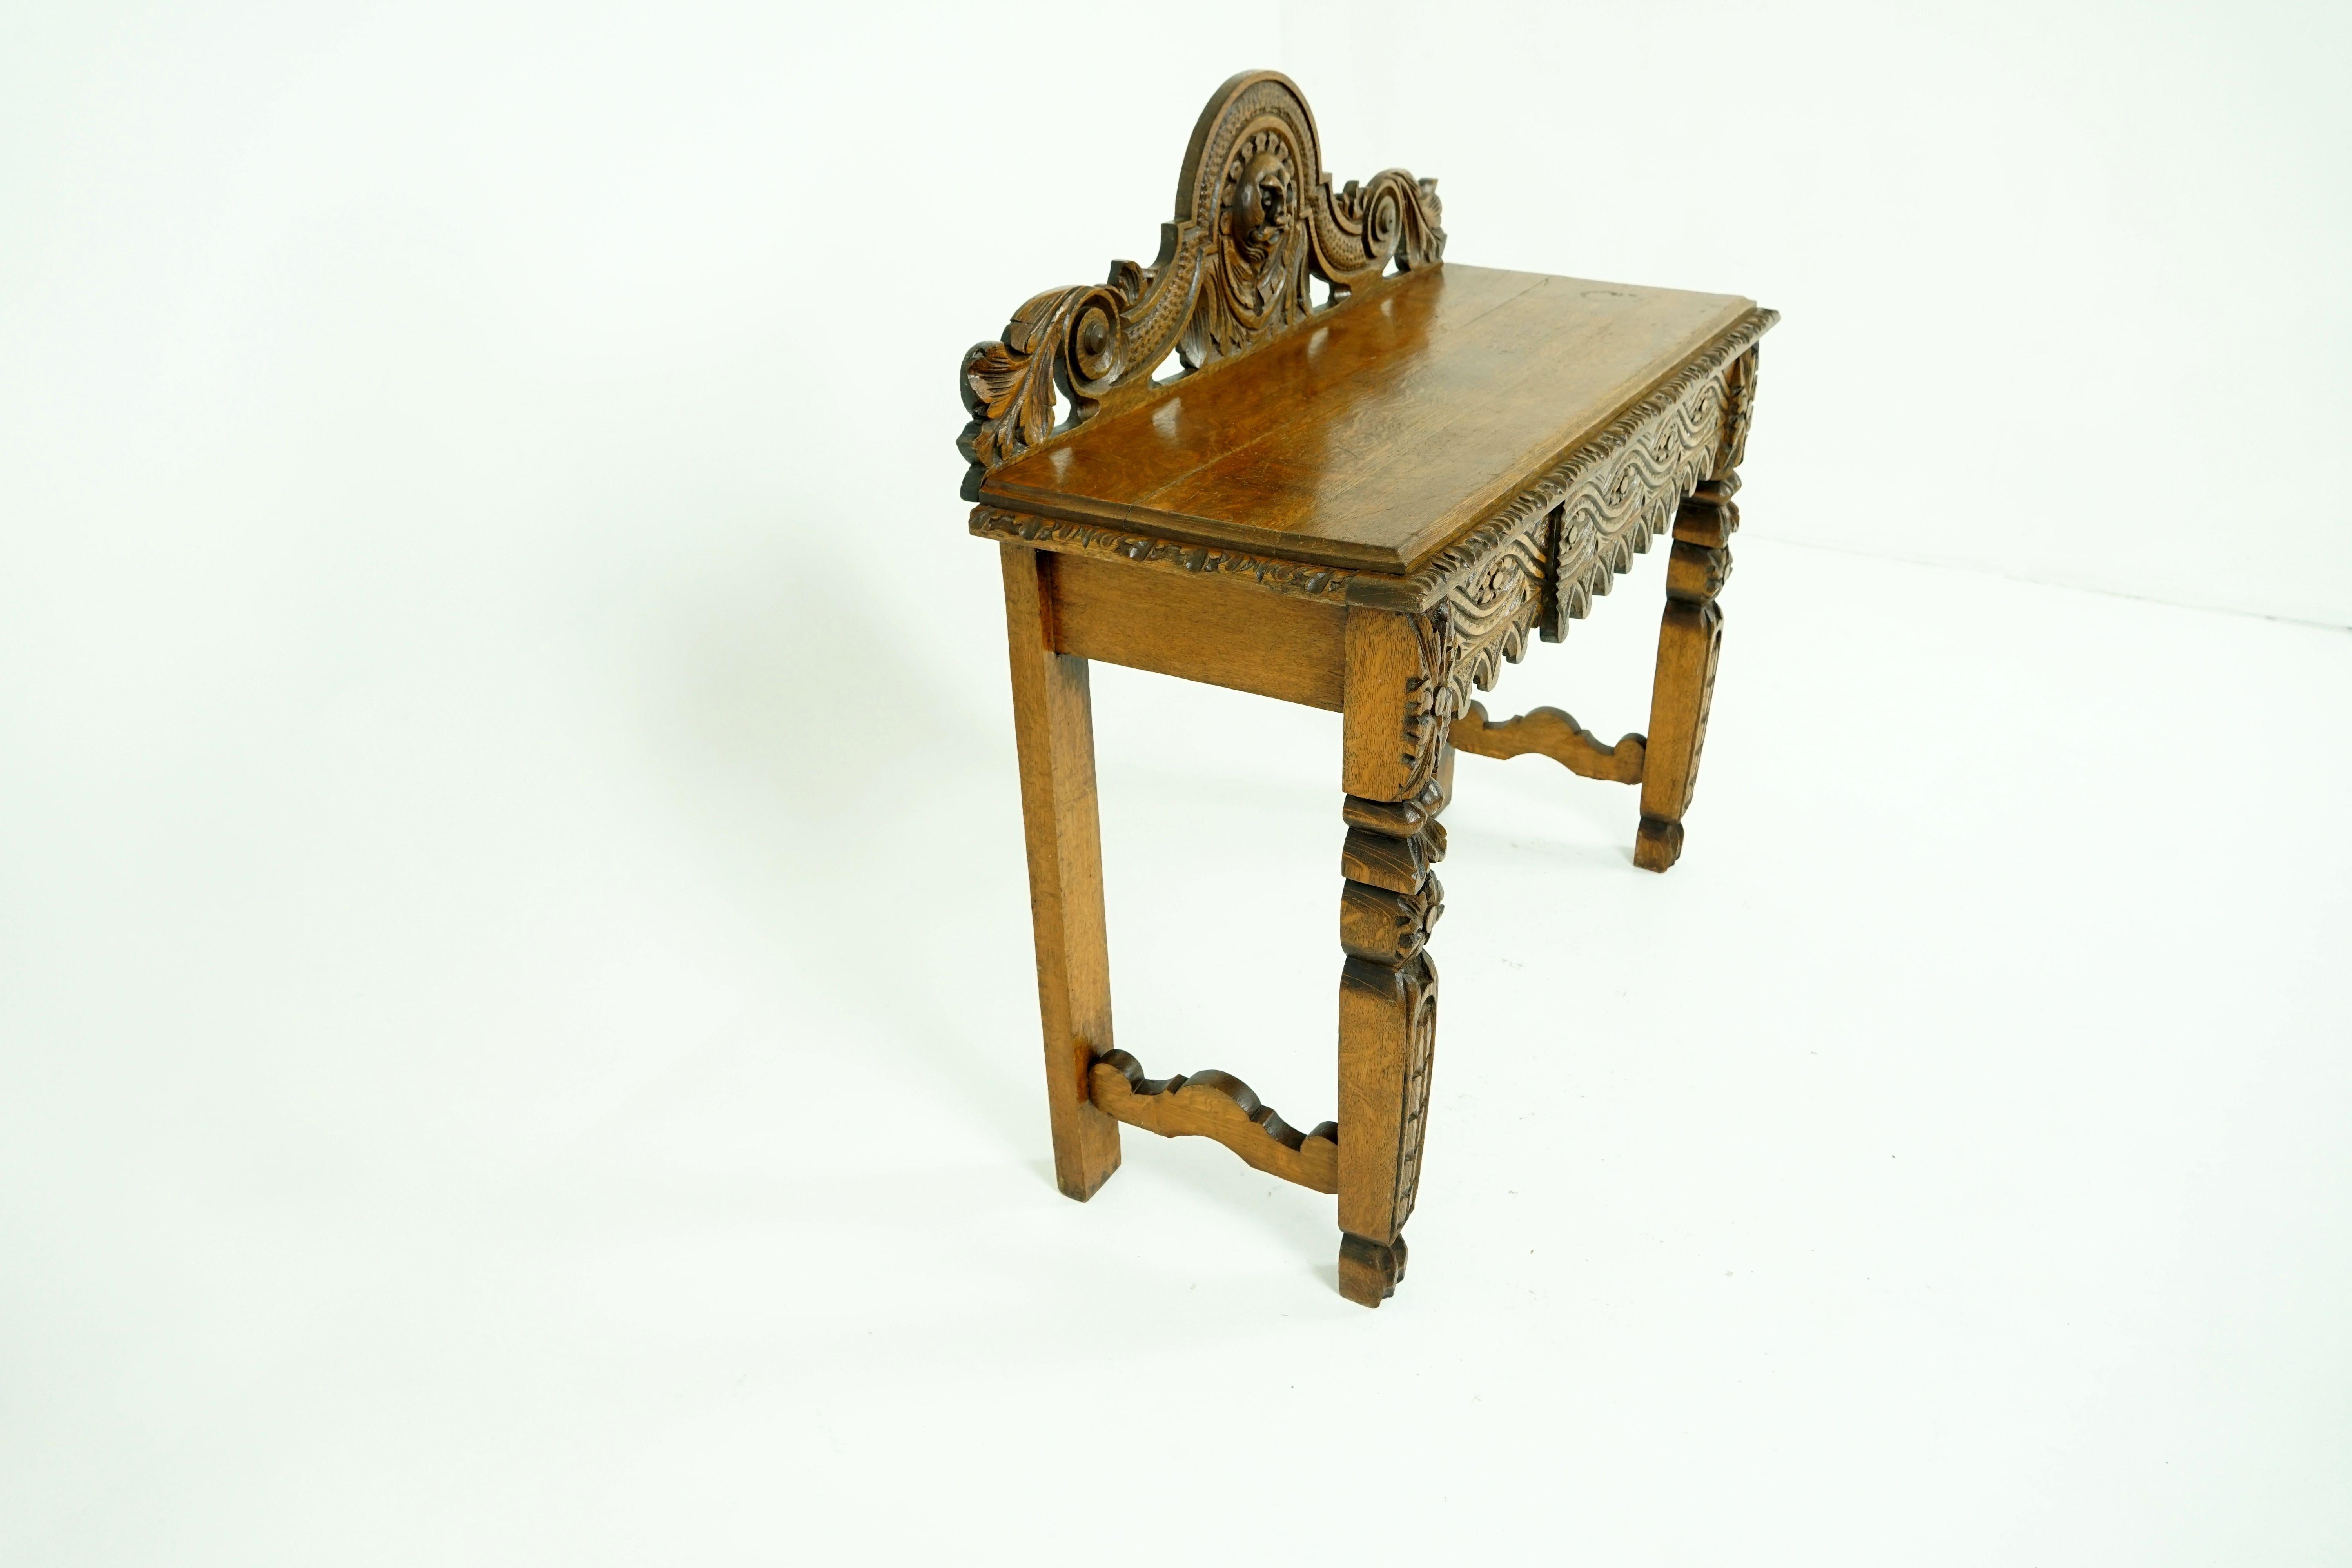 Antique oak hall table, Victorian carved oak side server table, antique furniture, Scotland, 1880, B1876

Scotland, 1880
Solid oak
Original finish
Top of the table is intricately carved with a head to the center
Floral carvings to the